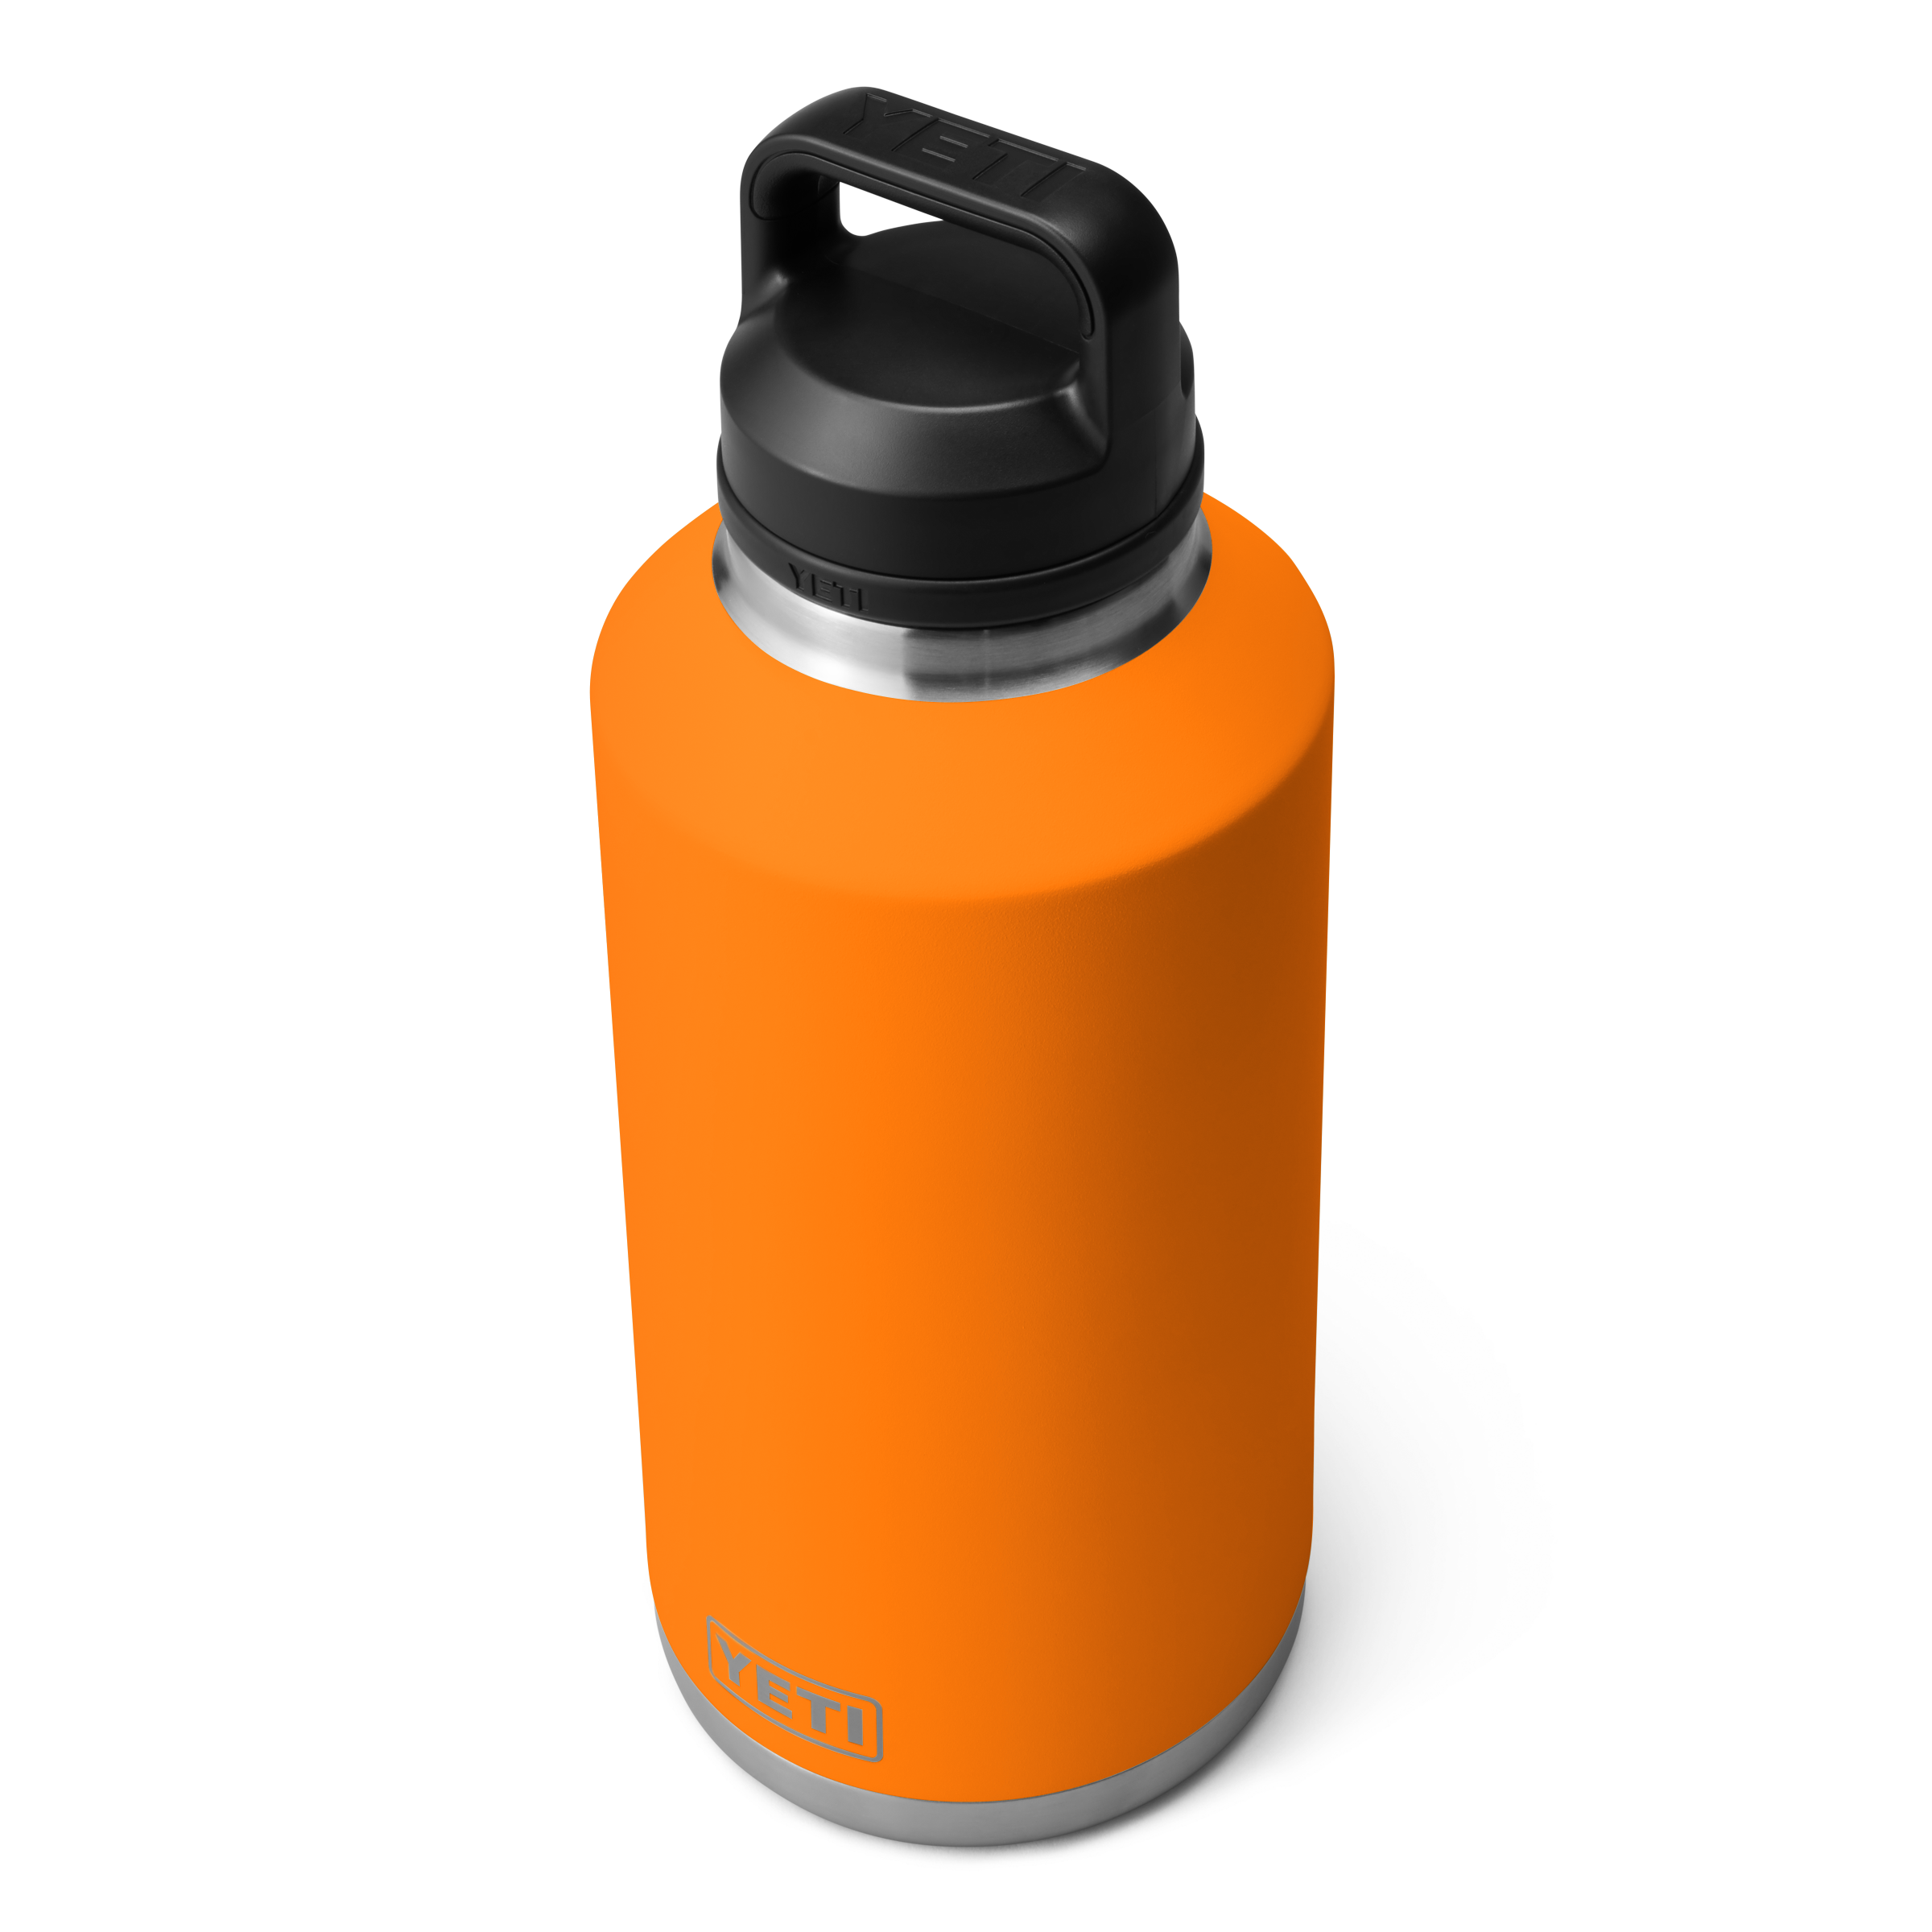 Drink bottle, orange bottle, keeps cold drinks cold, 100% leak proof, easy to carry, double vacuum insulated, yeti